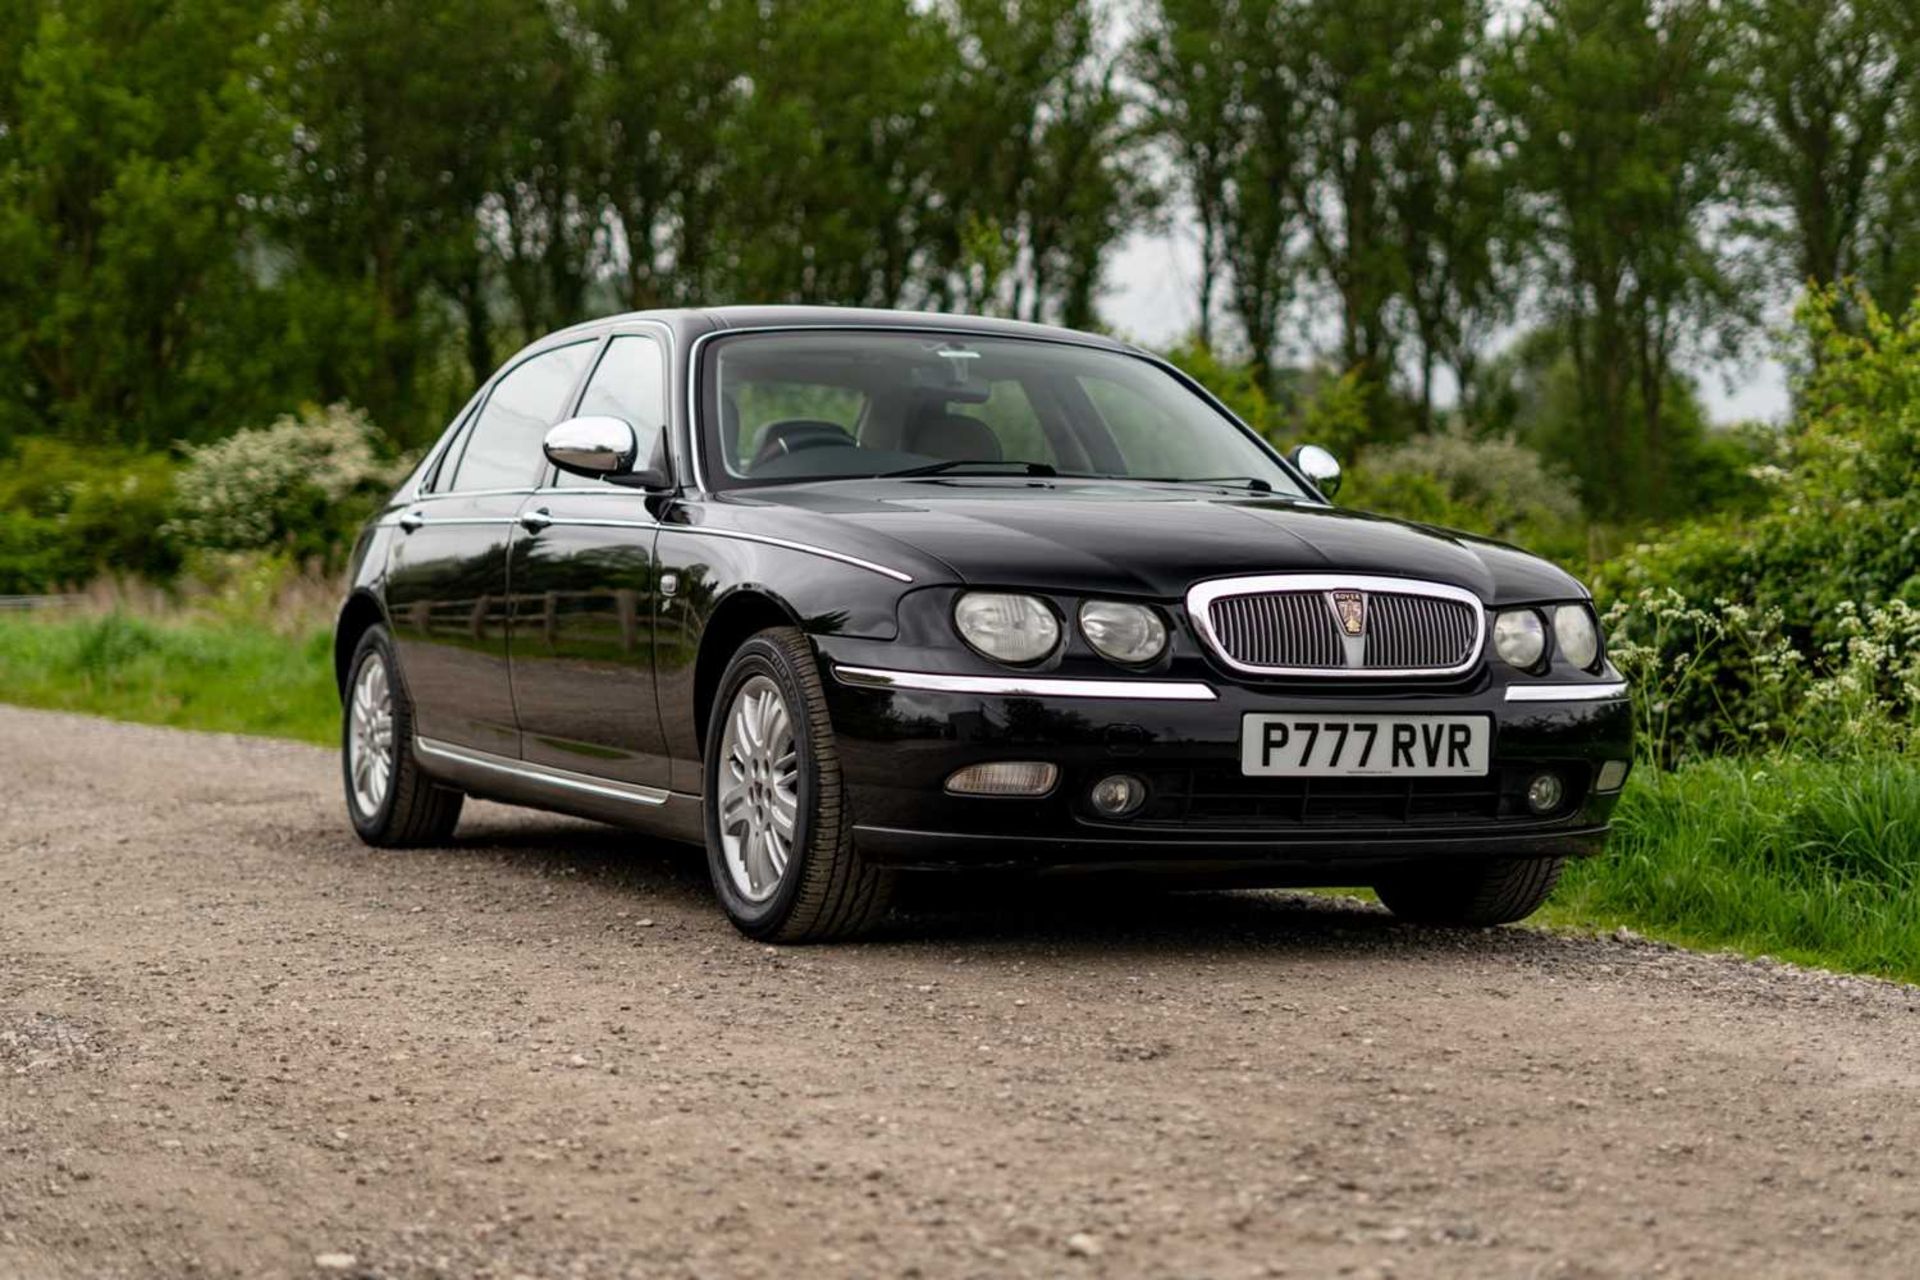 2003 Rover 75 Connoisseur ***NO RESERVE*** Long wheelbase specification 